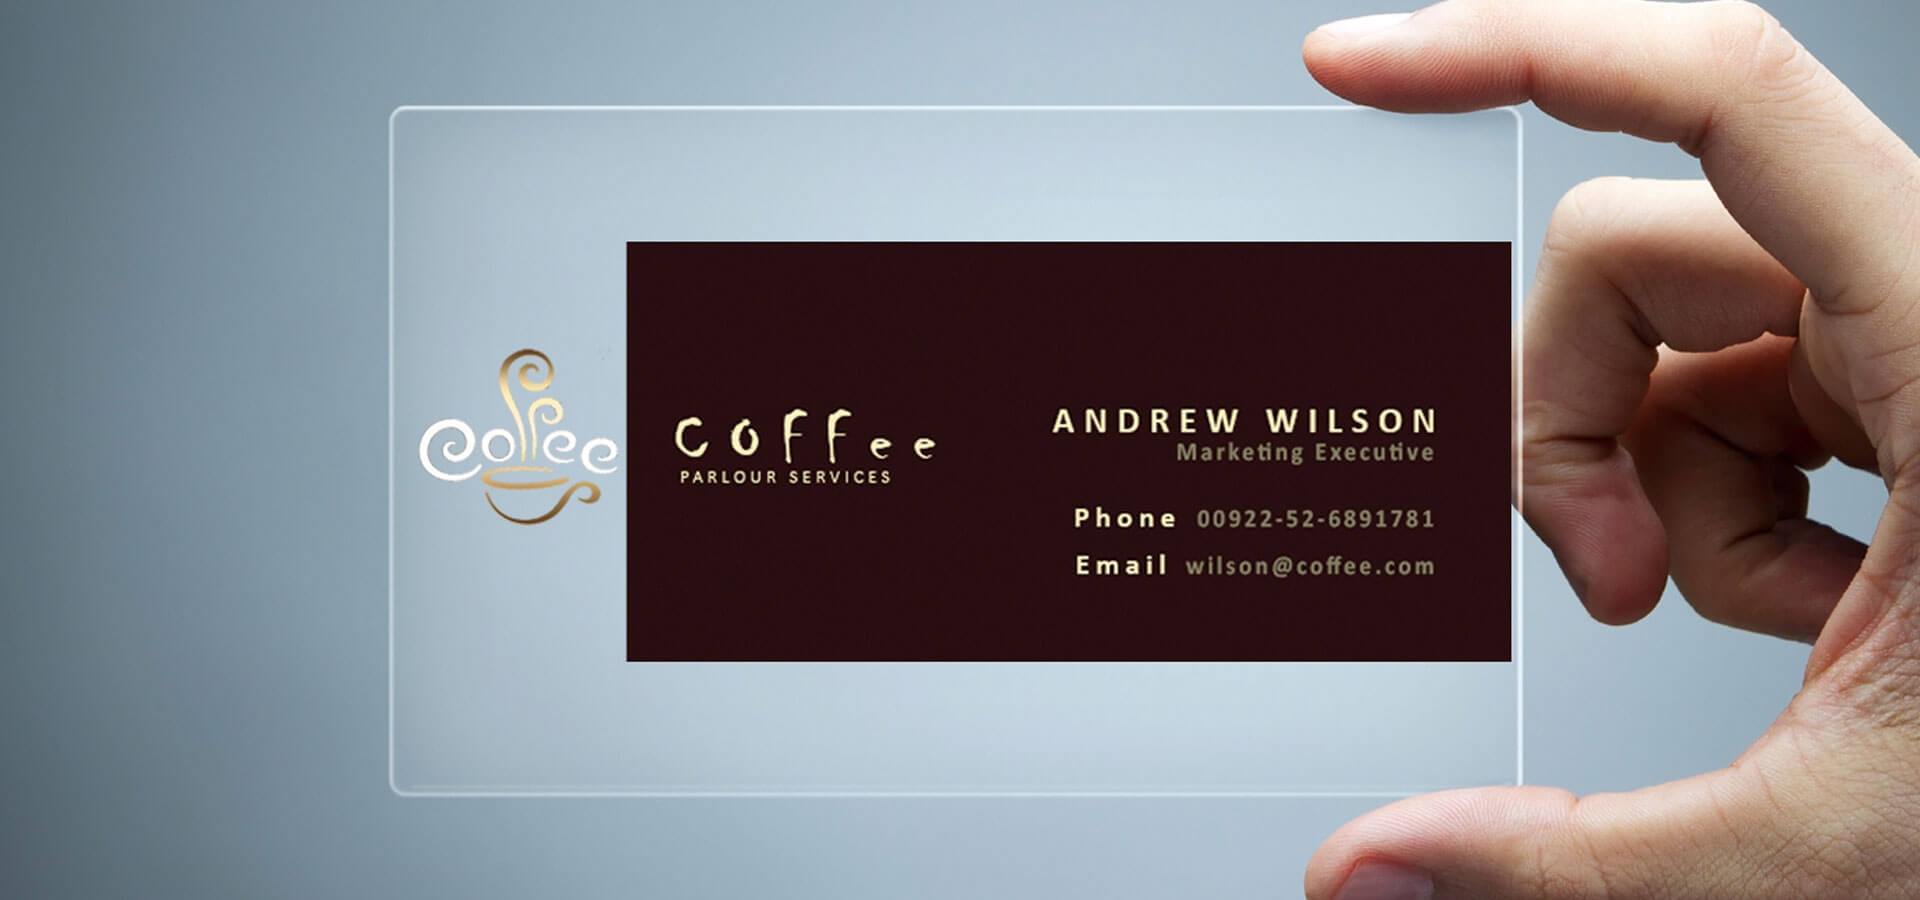 26+ Transparent Business Card Templates – Illustrator, Ms With Regard To Visiting Card Templates For Photoshop